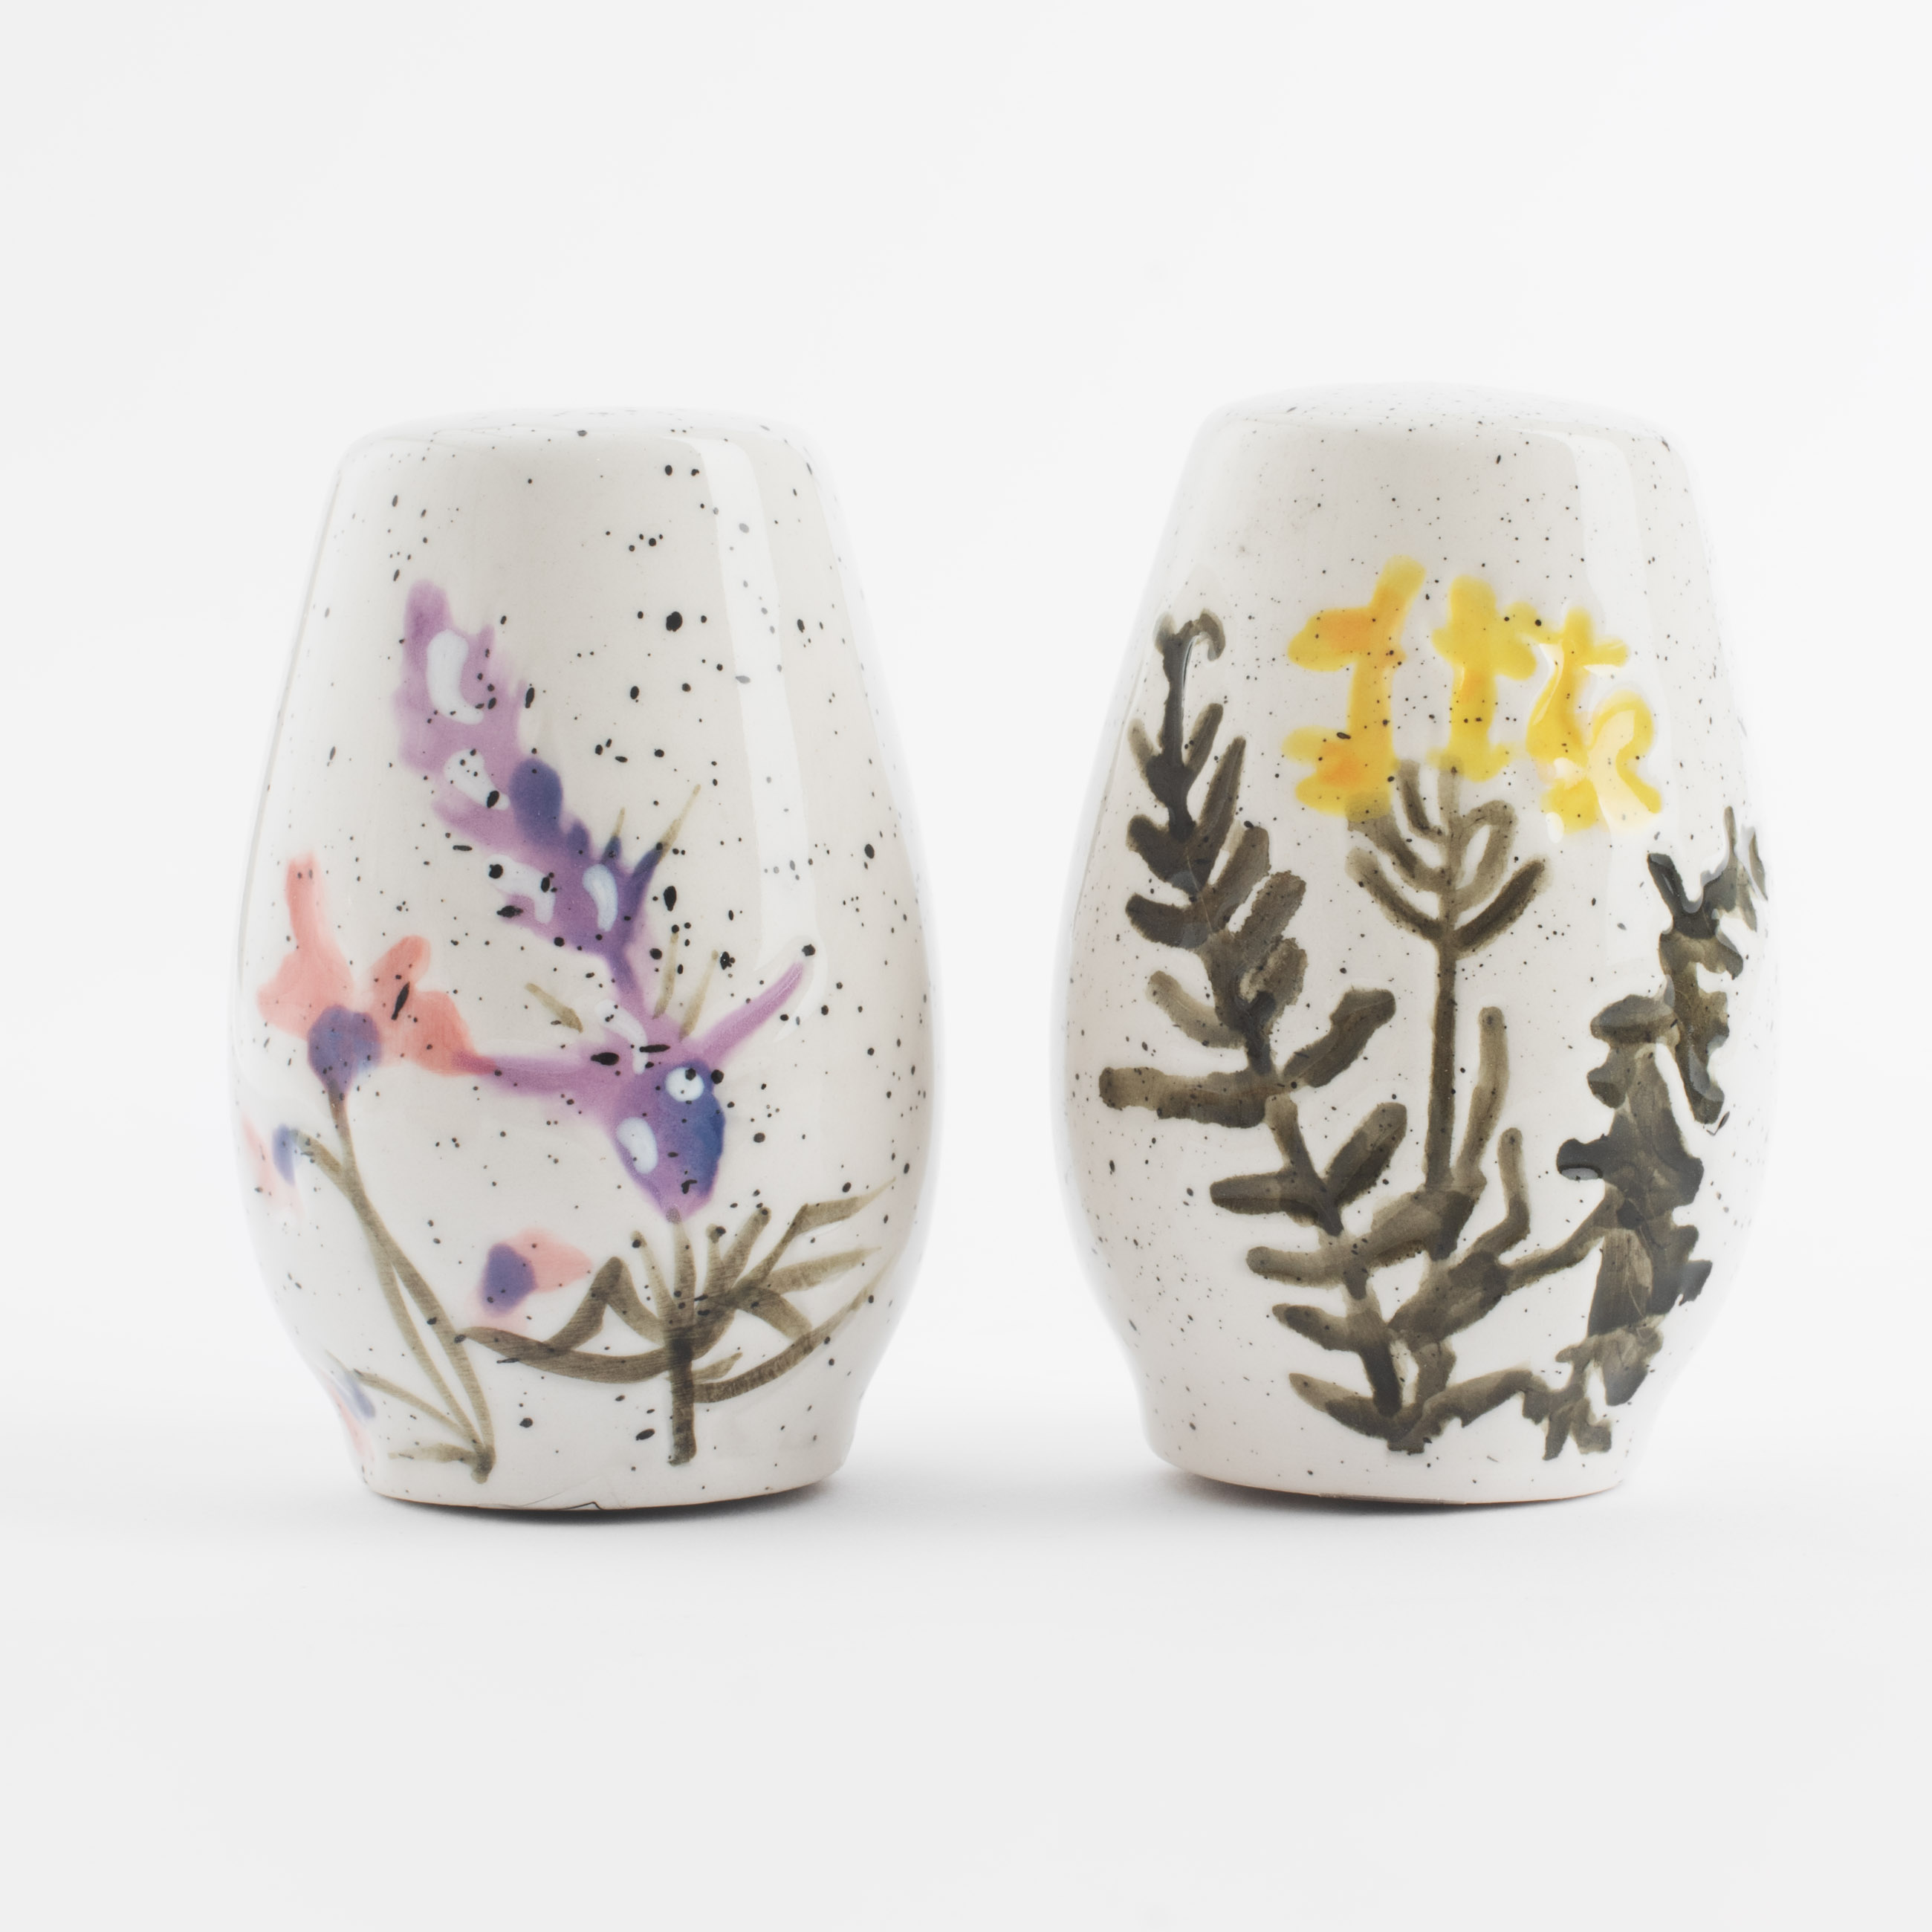 Salt and pepper set, 7 cm, ceramic, milky, speckled, Wildflowers, Meadow speckled изображение № 2